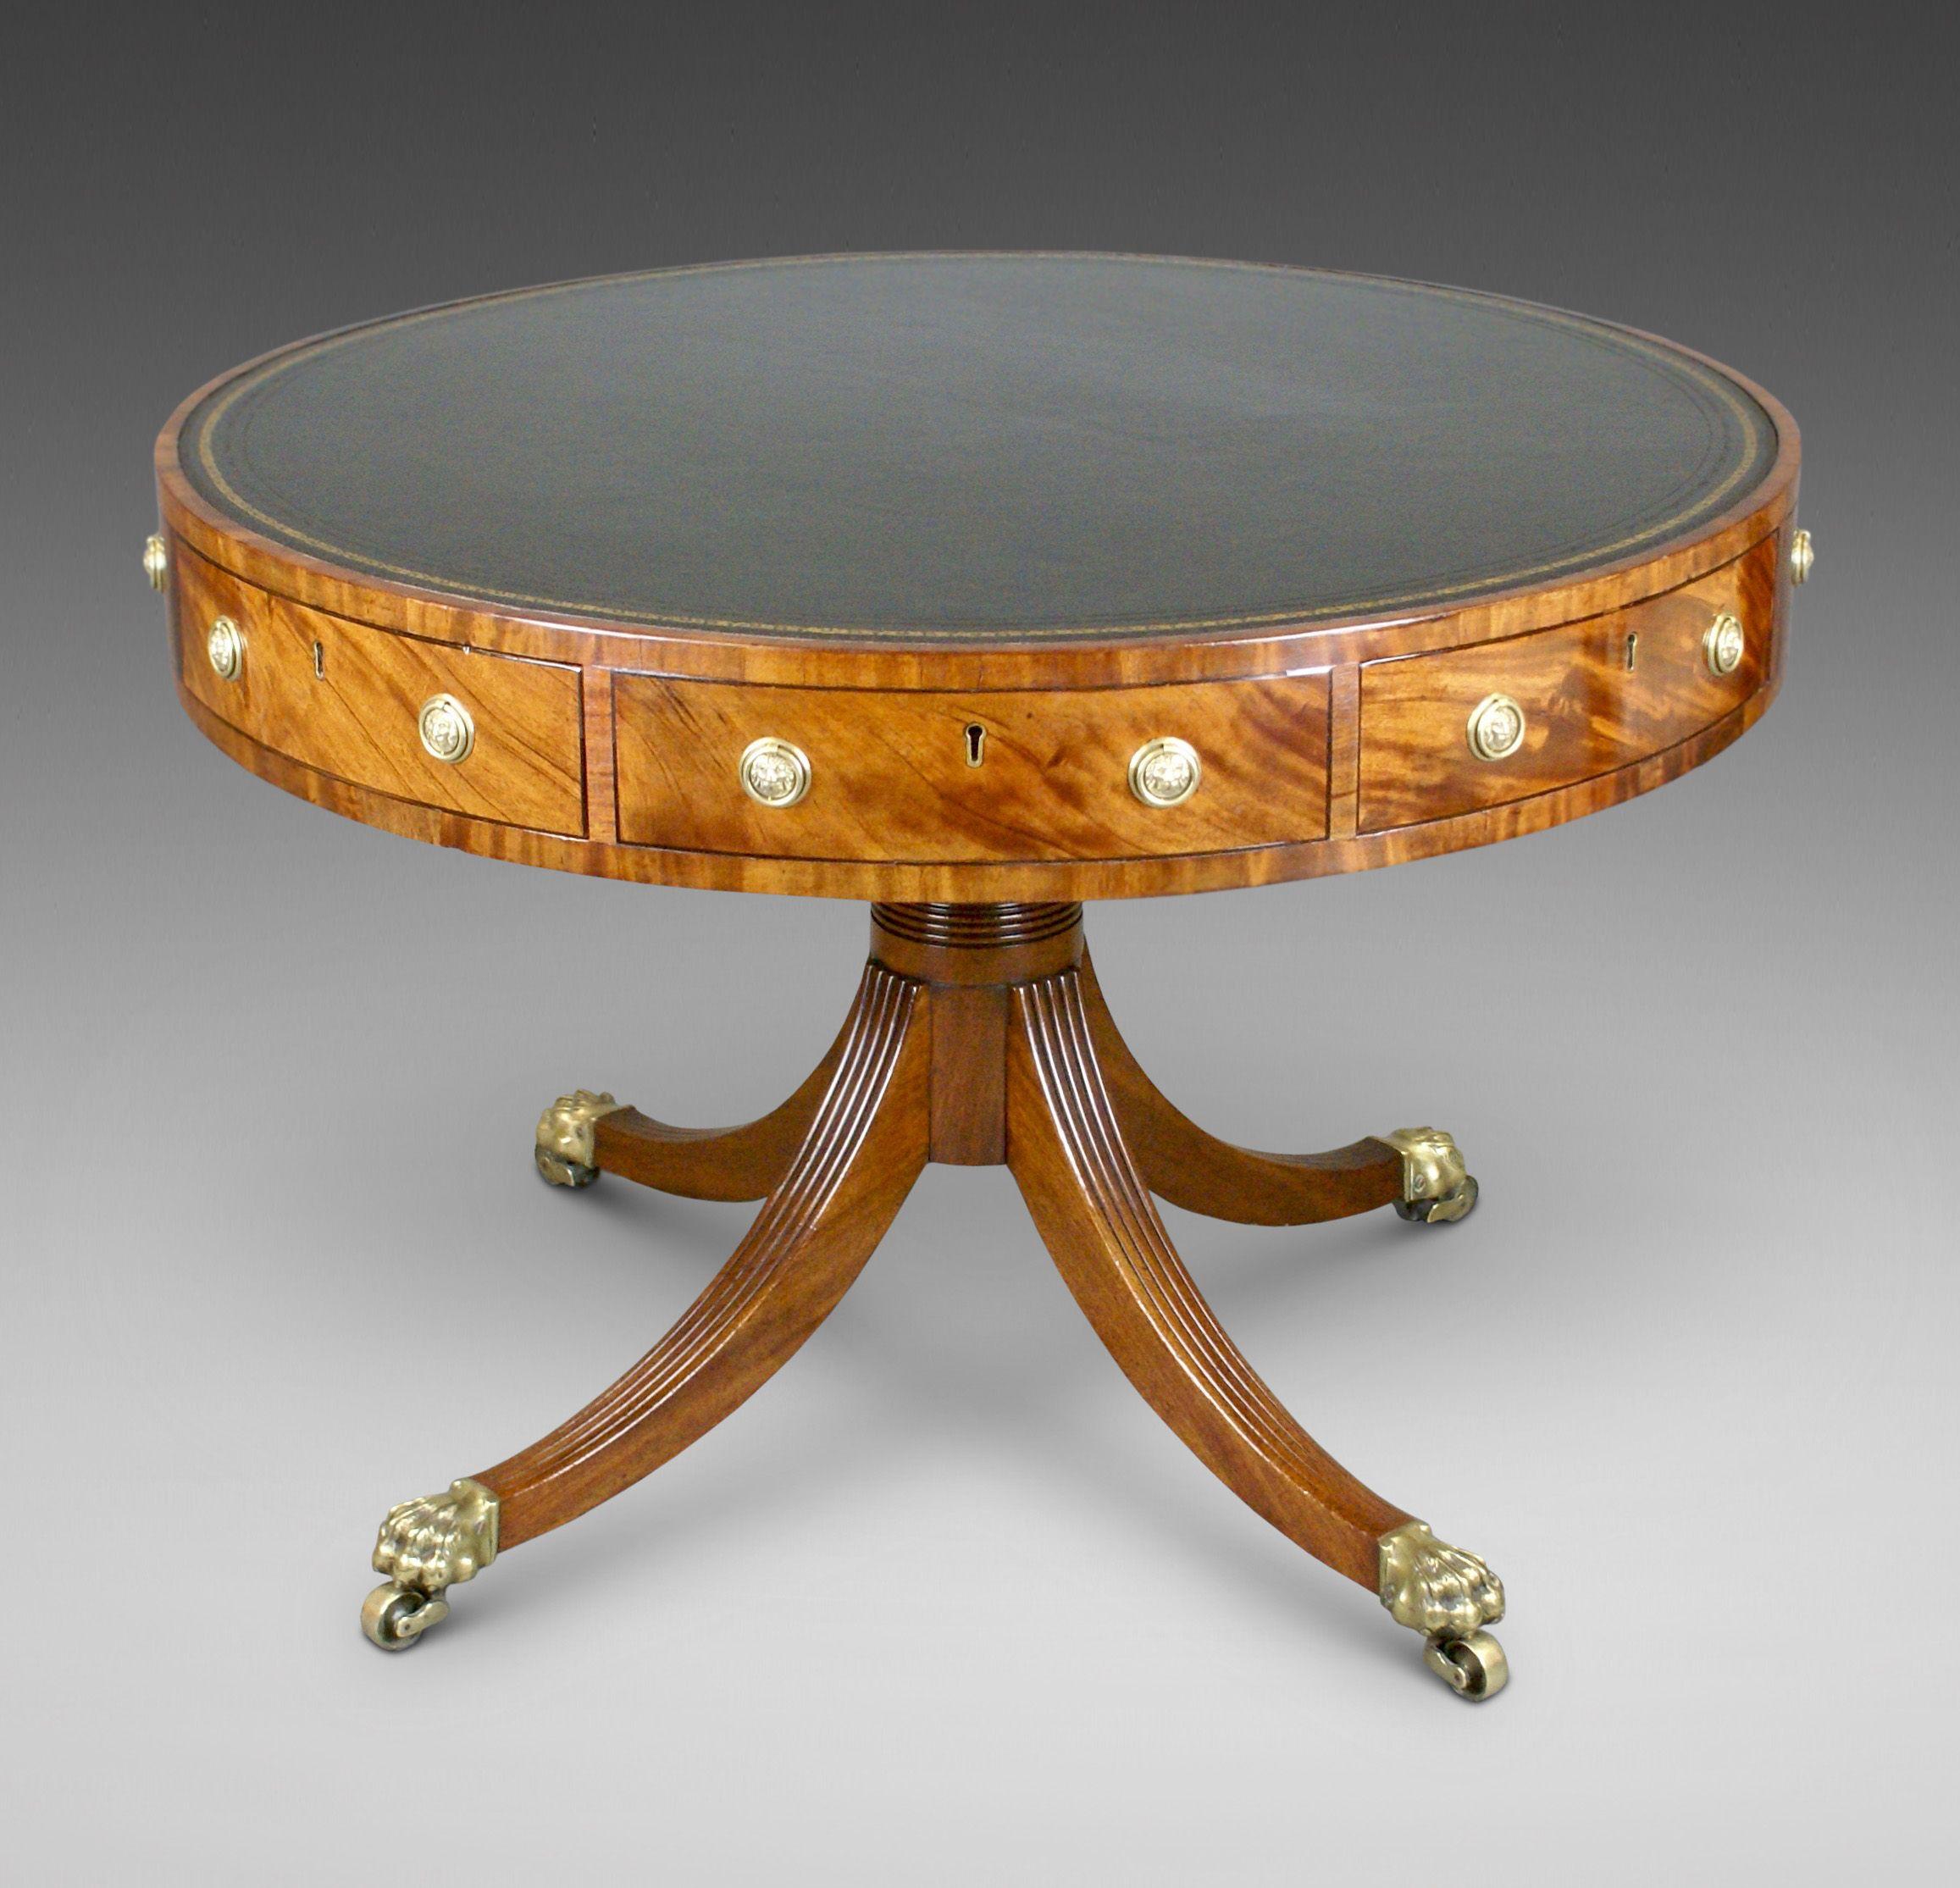 A Fine Regency Period Mahogany Drum table. Raised on four reeded swept legs with original brass paw castors and with a turned gun -barrel column. The top with four frieze drawers and four dummies all with lions mask ring handles (replacements). The